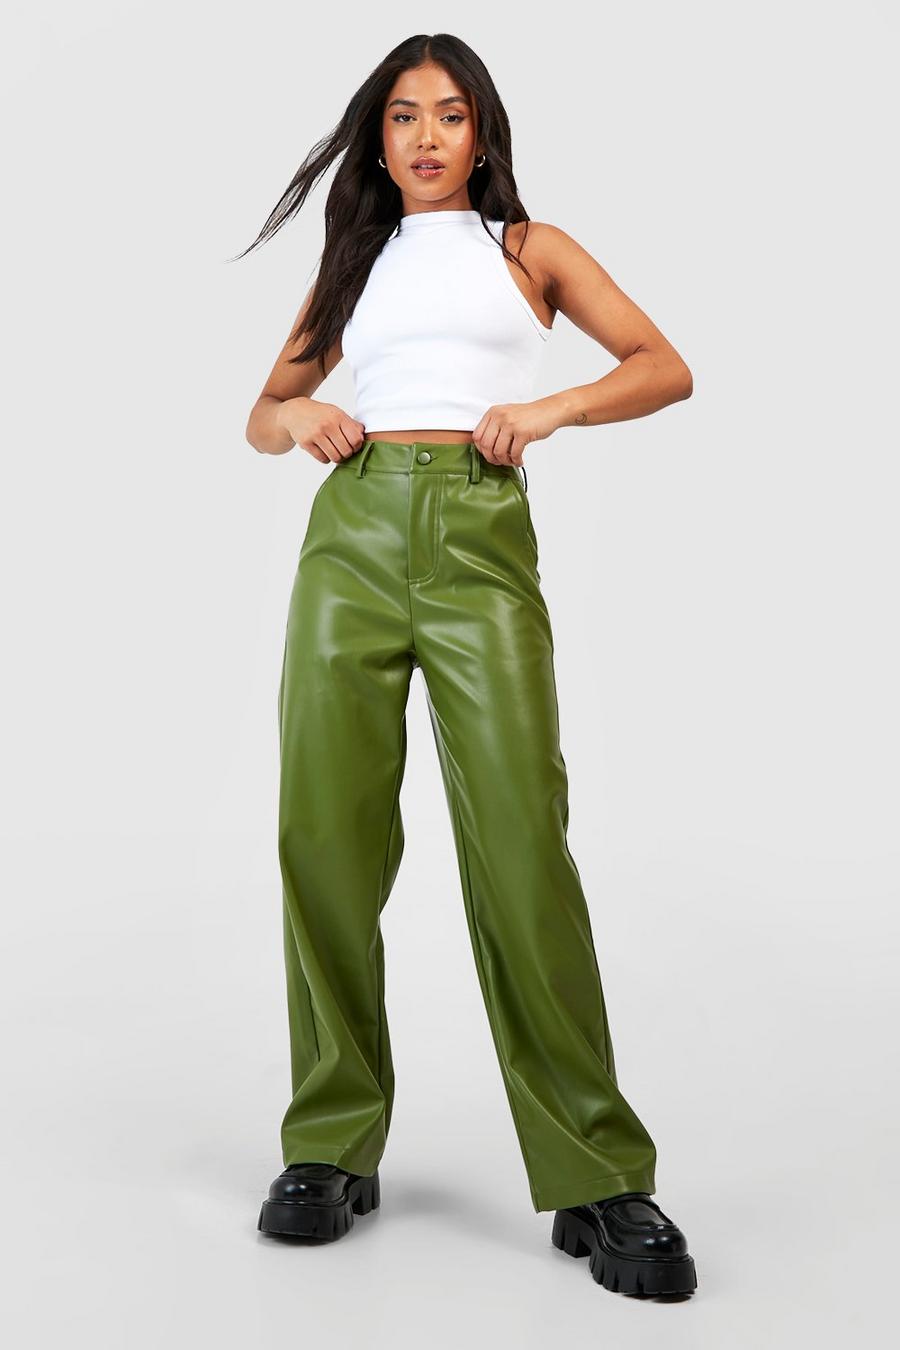 Khaki Petite Leather Look Relaxed Fit Straight Leg Pants